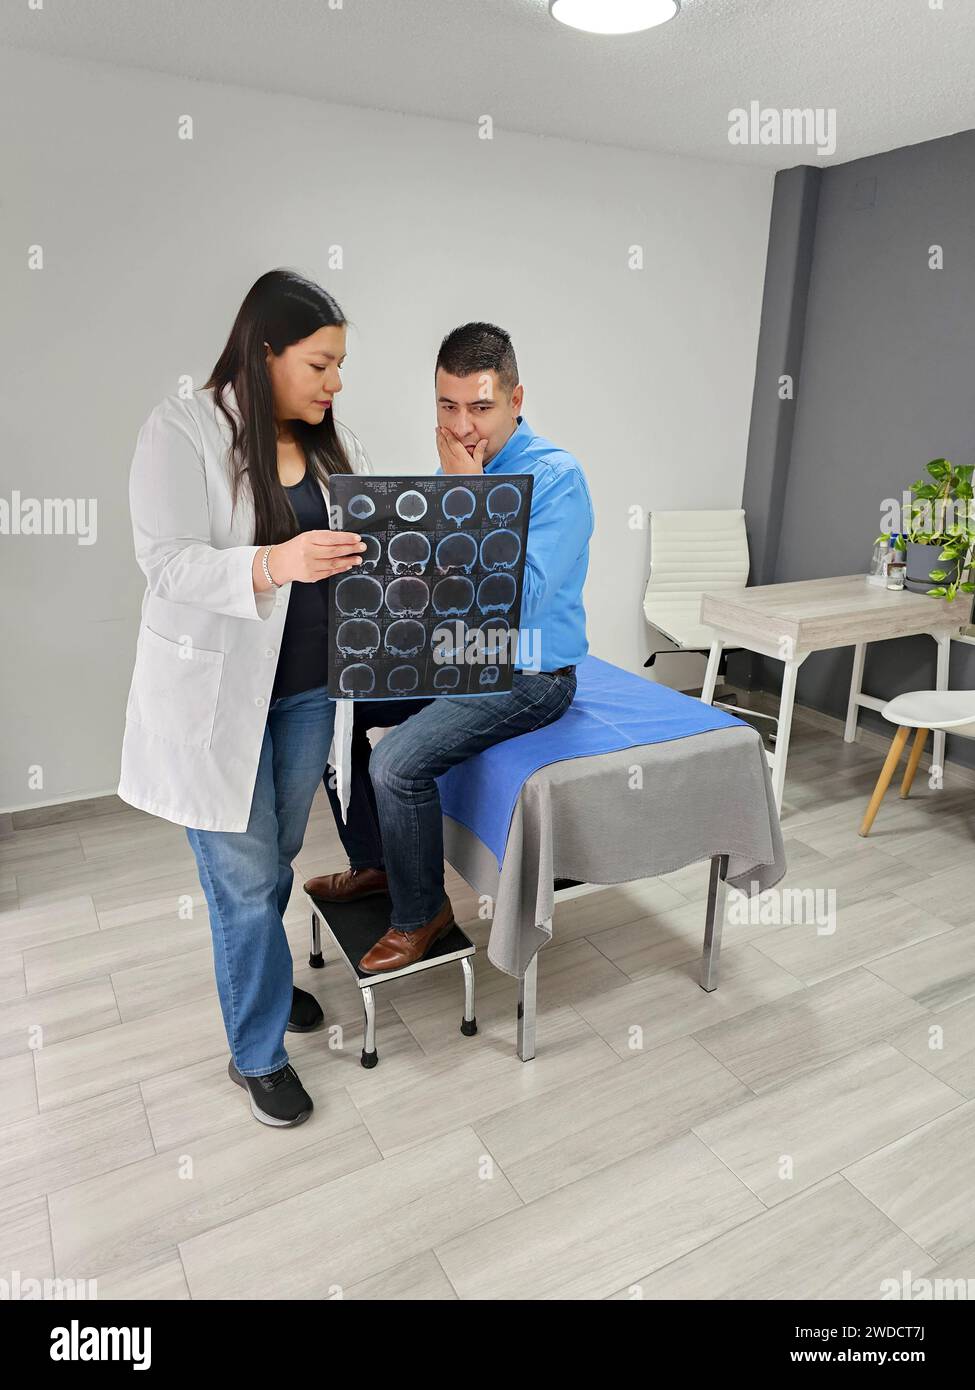 Female doctor, Latina neurologist, attends to male, brunette patient in her office, shows brain x-ray to evaluate head injuries and brain disorders Stock Photo